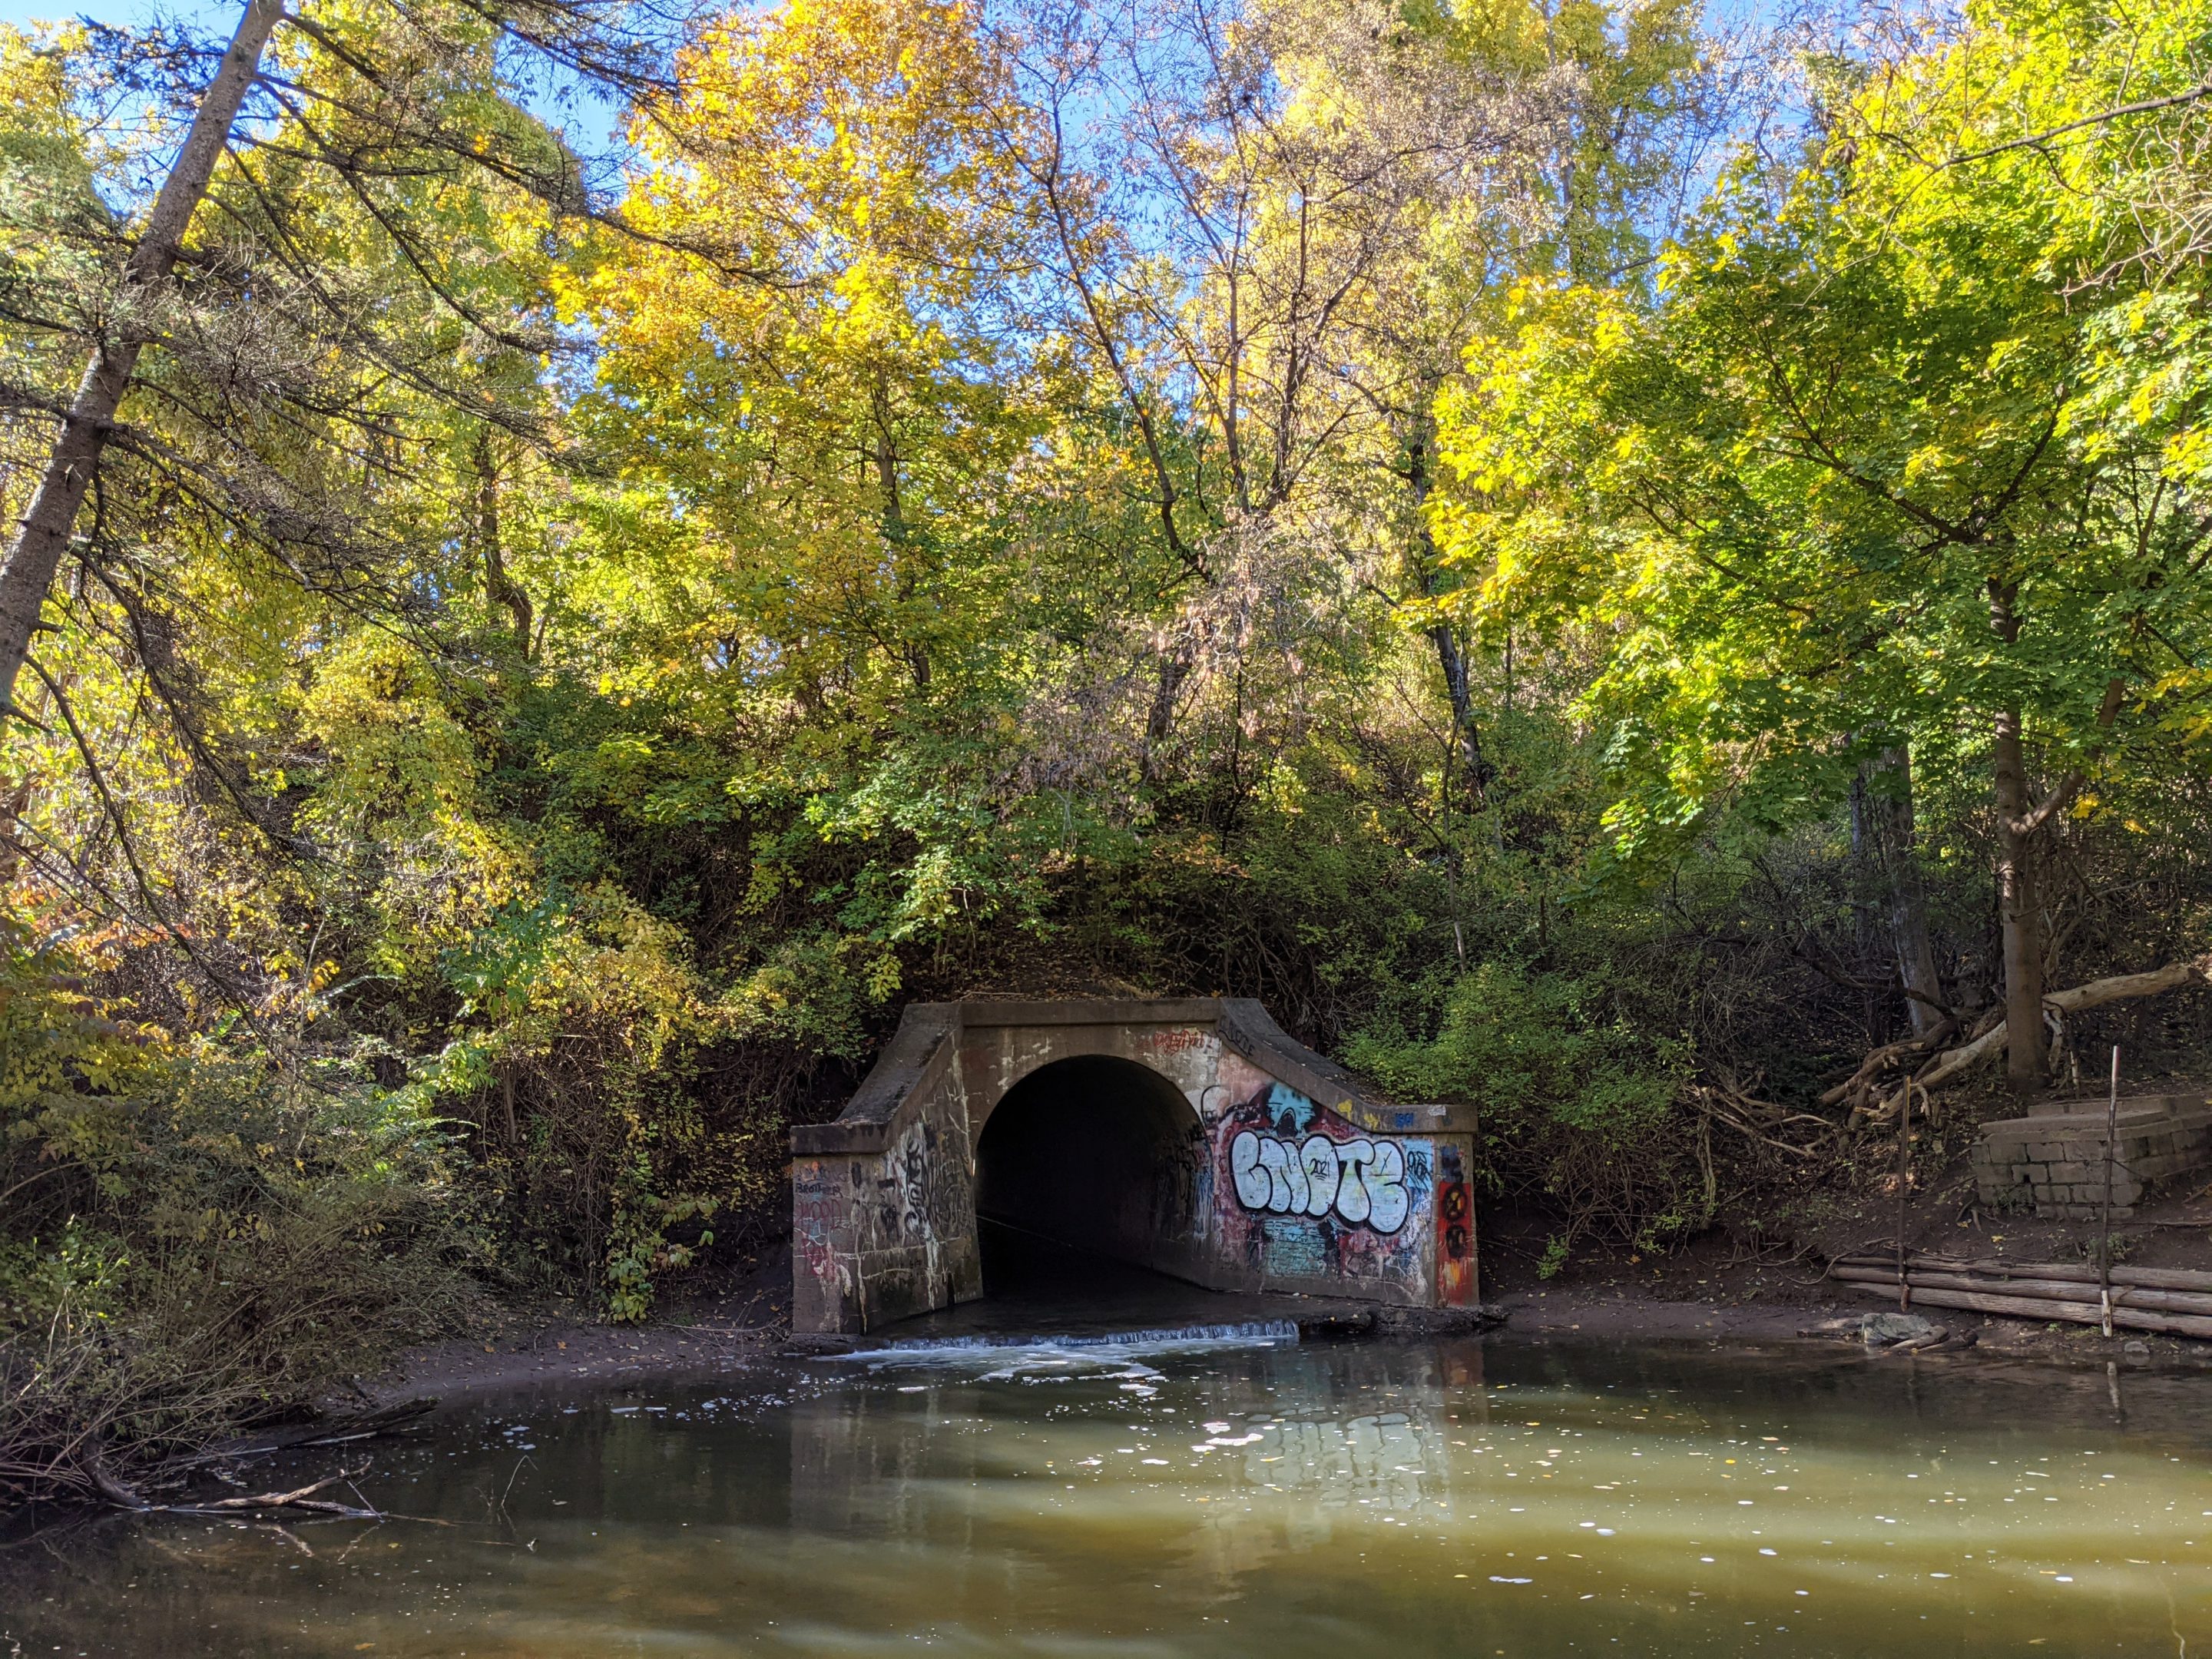 The large culvert, covered in graffiti, for Shipbuilders Creek on the Vosburg Trail